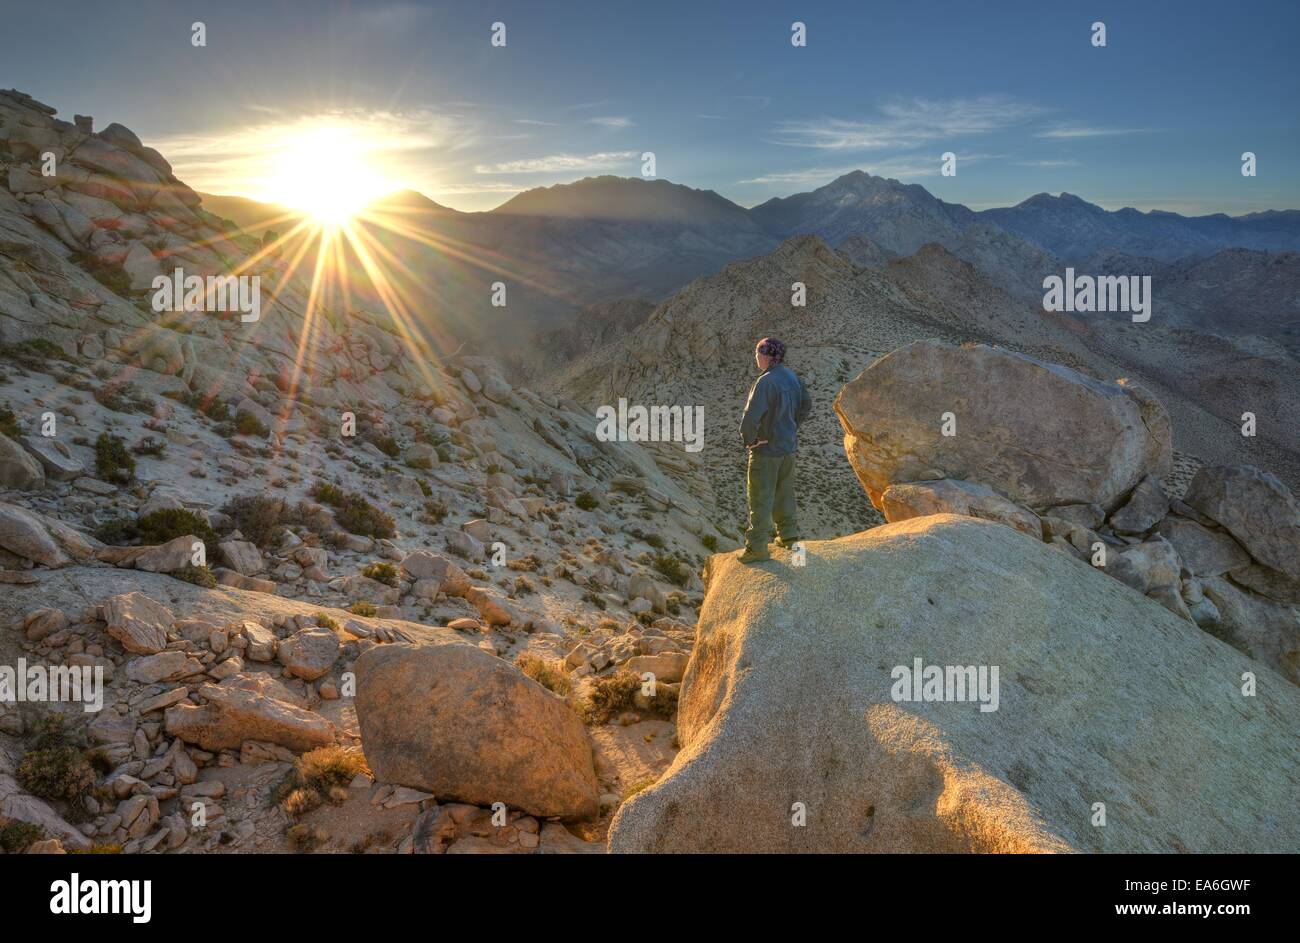 Five Fingers High Resolution Stock Photography and Images - Alamy